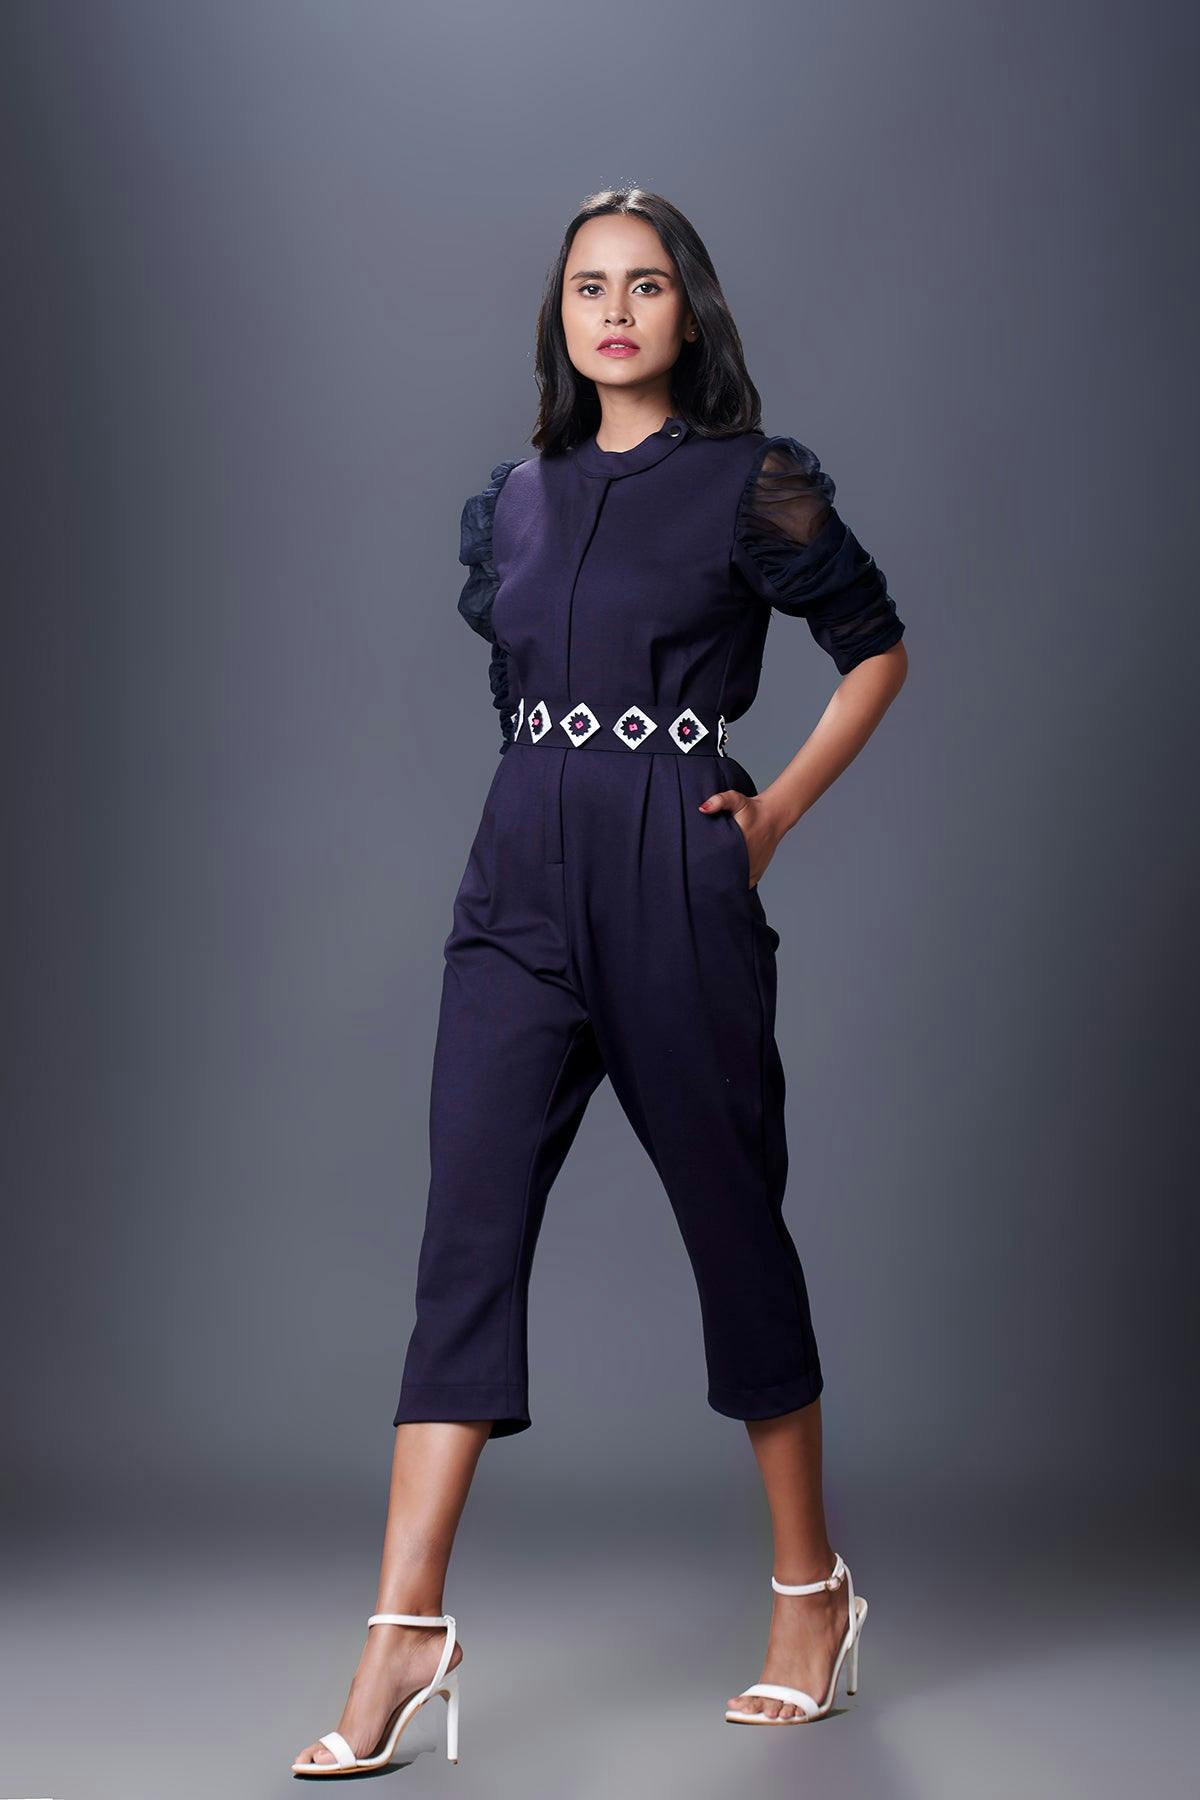 WF-1141 - Puffed Sleeves Jumpsuit With Front Metal Zipper Comes With Belt, a product by Deepika Arora